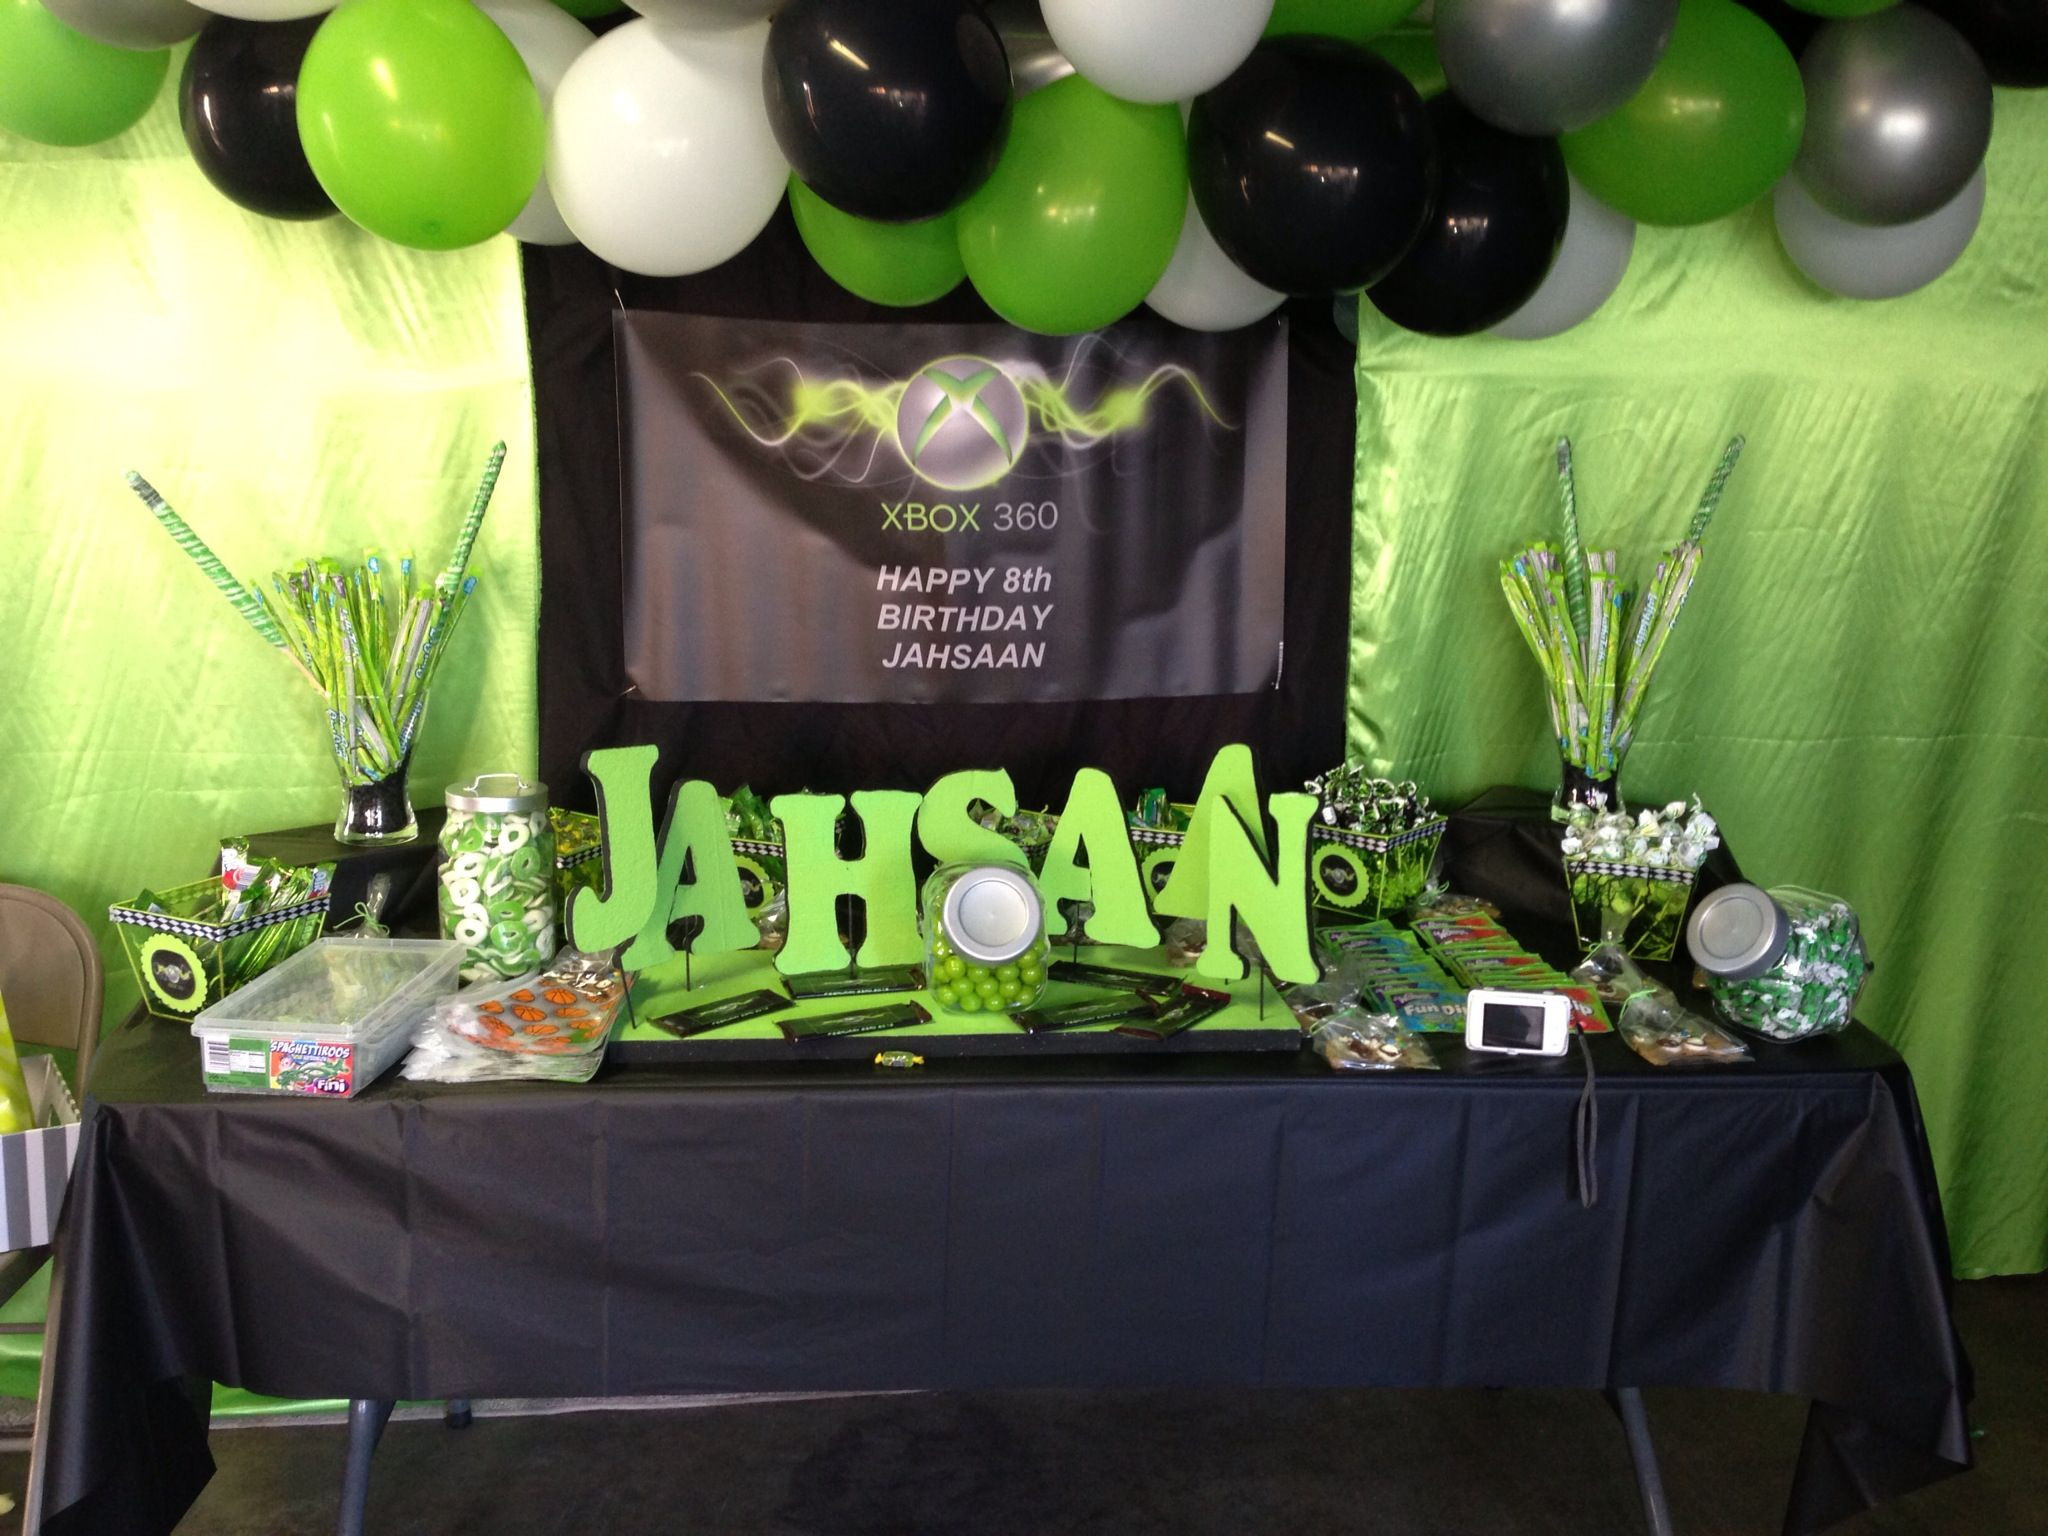 Video Game Birthday Party Ideas
 XBox party This looks so cool